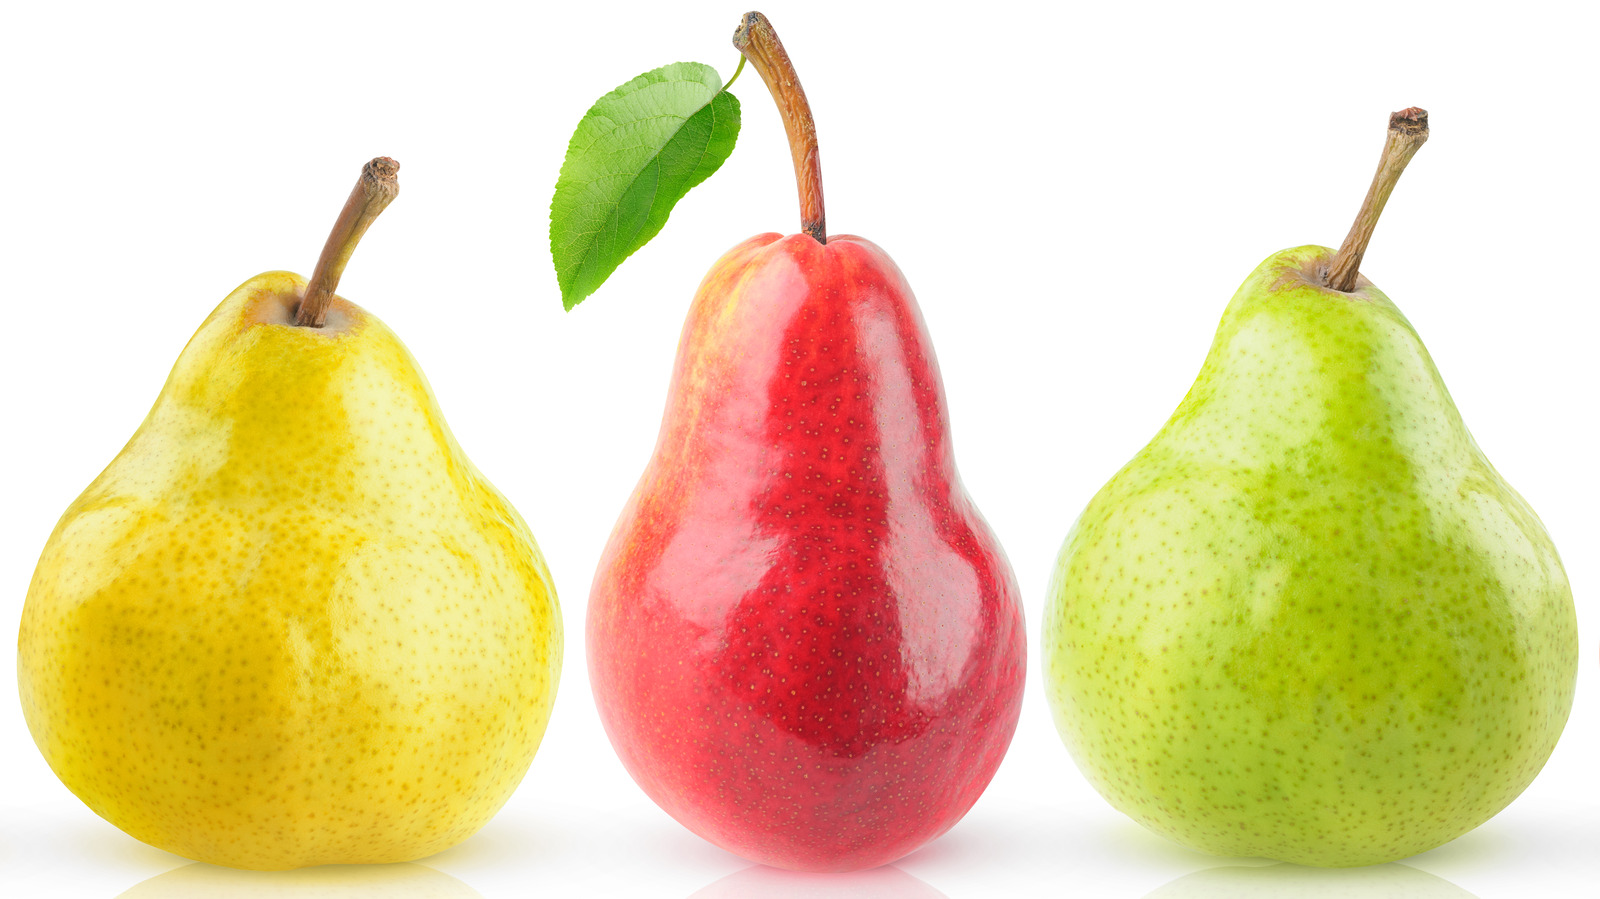 Types of Pears & Other Pear Facts